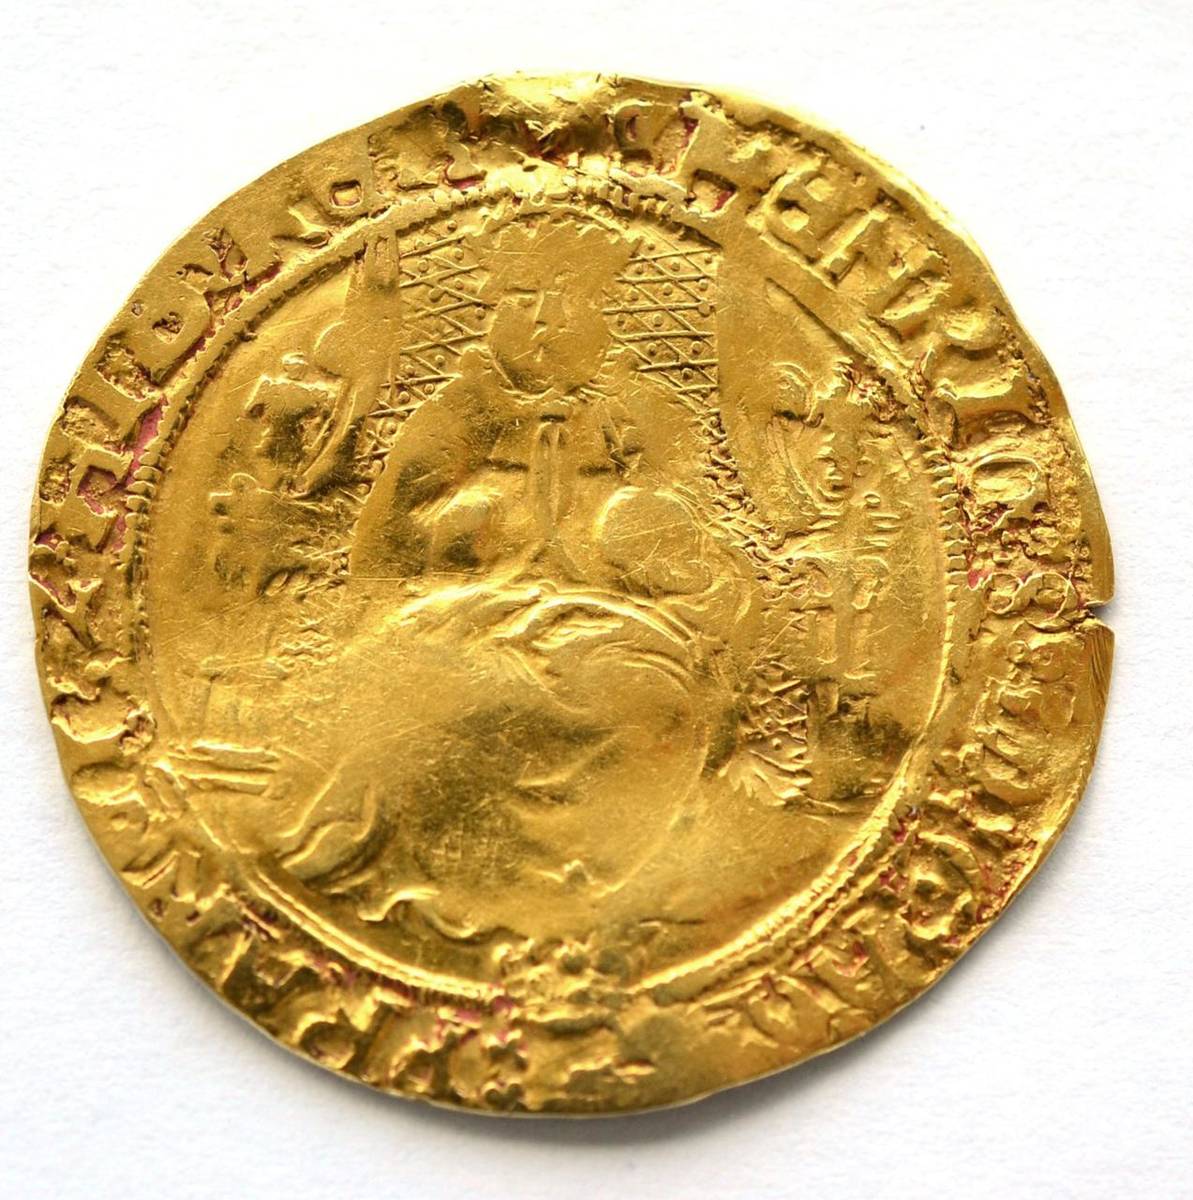 Lot 3 - Henry VIII Gold Half Sovereign, third coinage (1544-47), Southwark Mint MM S, obv. HENRIC 8 DI...